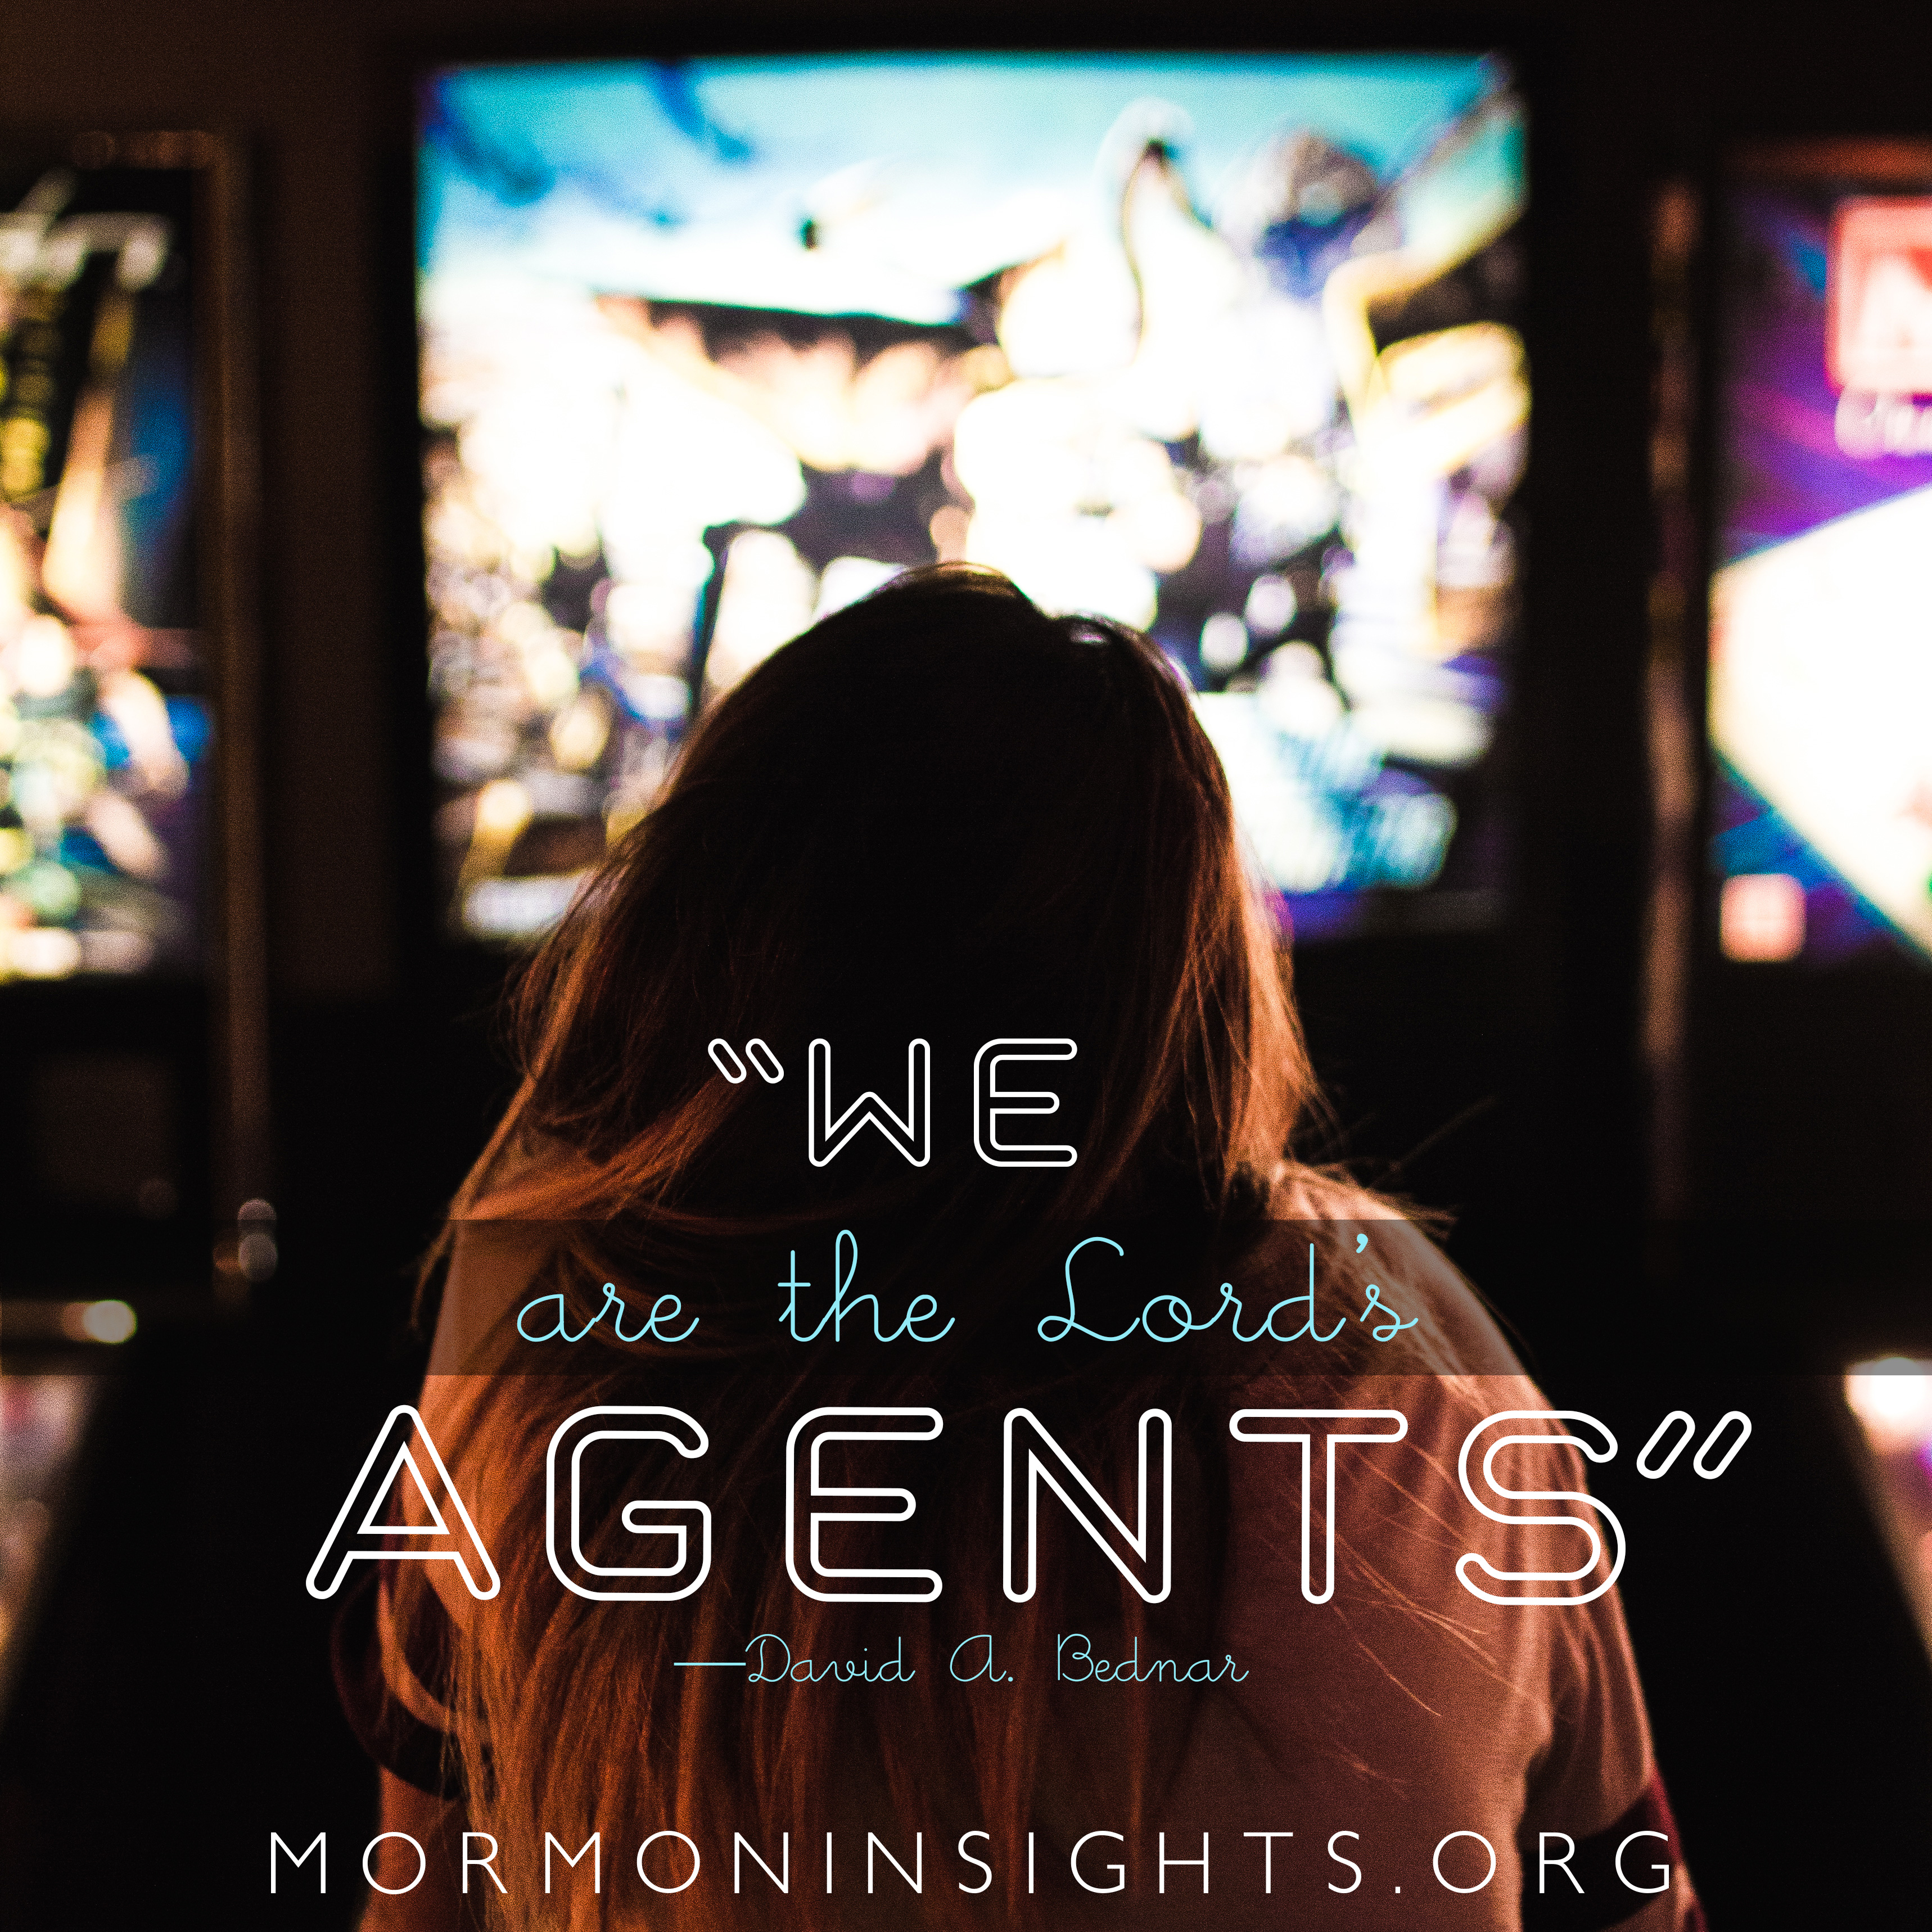 Image of the back of a girl in a red shirt with a quote: "We are the Lord's agents."